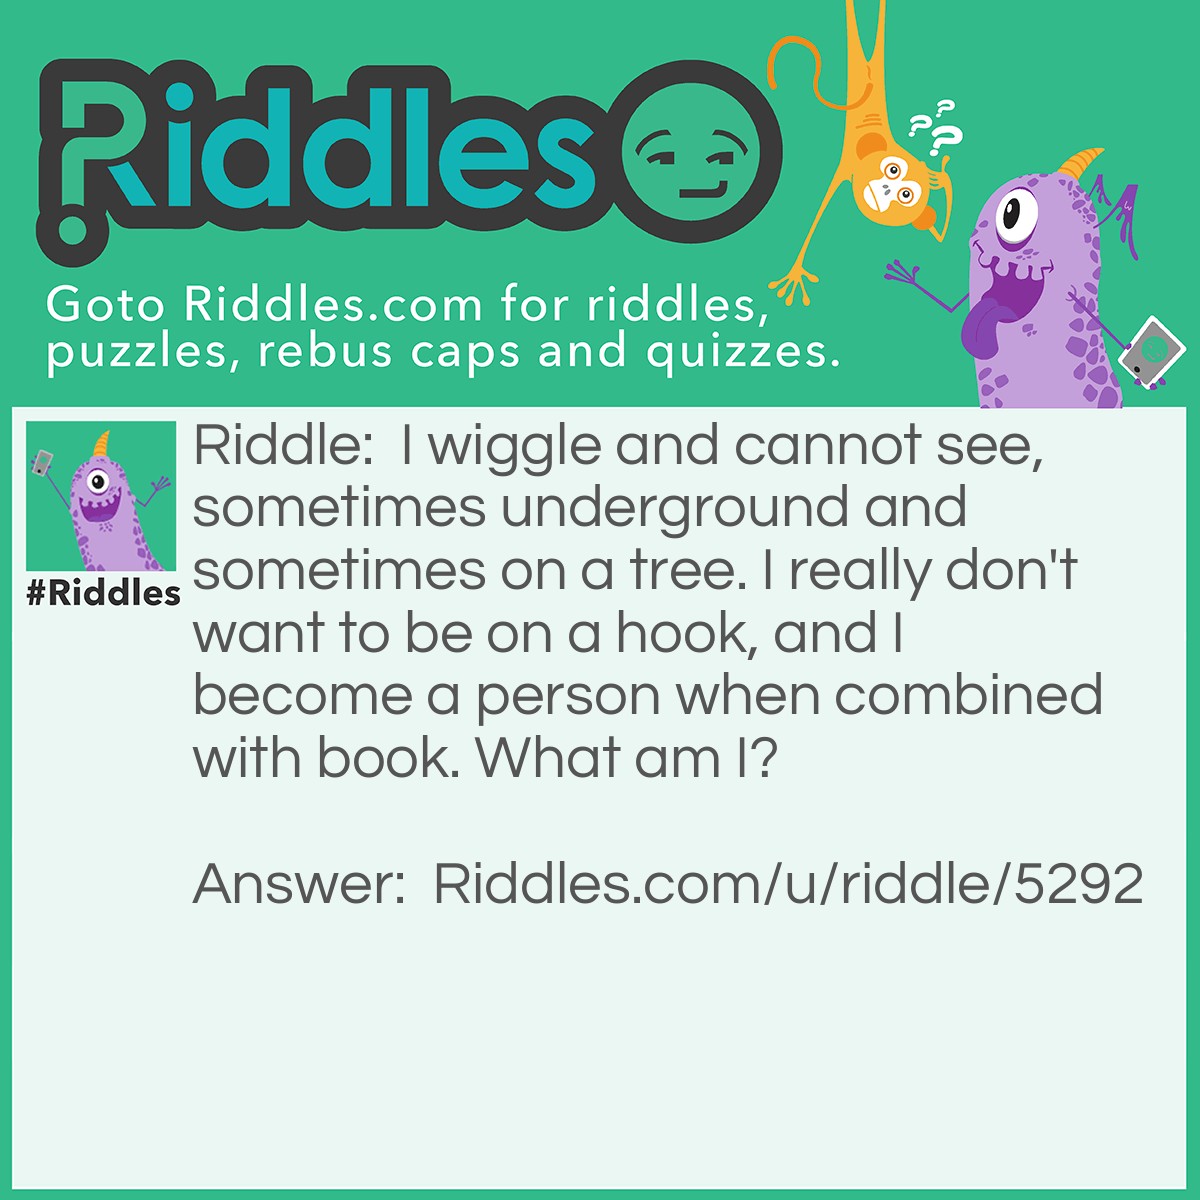 Riddle: I wiggle and cannot see, sometimes underground and sometimes on a tree. I really don't want to be on a hook, and I become a person when combined with book. What am I? Answer: I'm a worm. Pretty sad if you didn't get that.